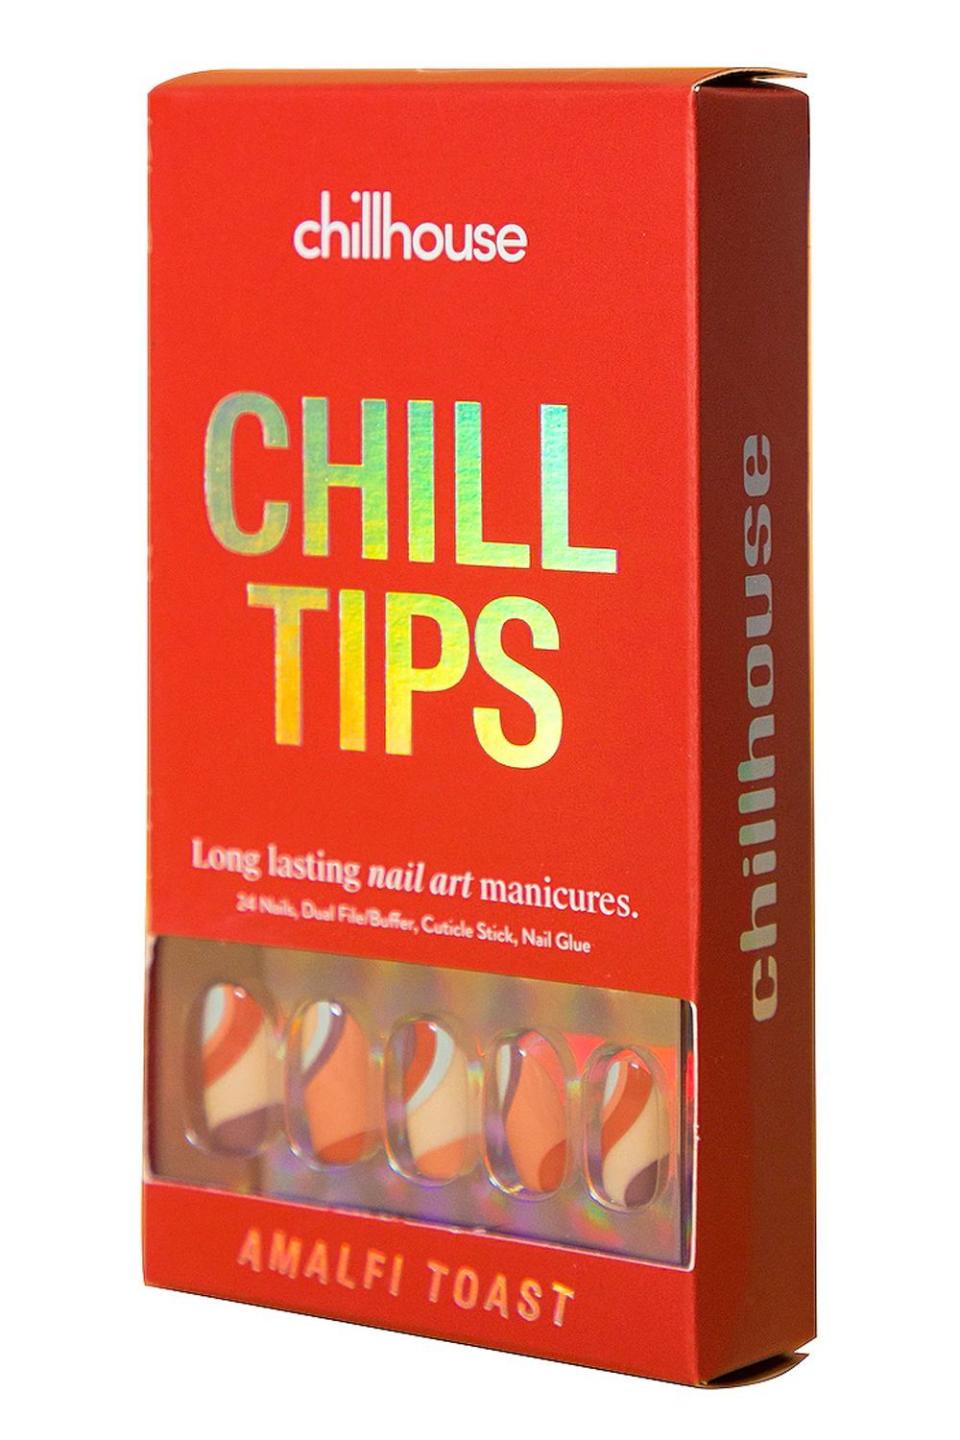 15) Chillhouse Chill Tips Press-On Nails